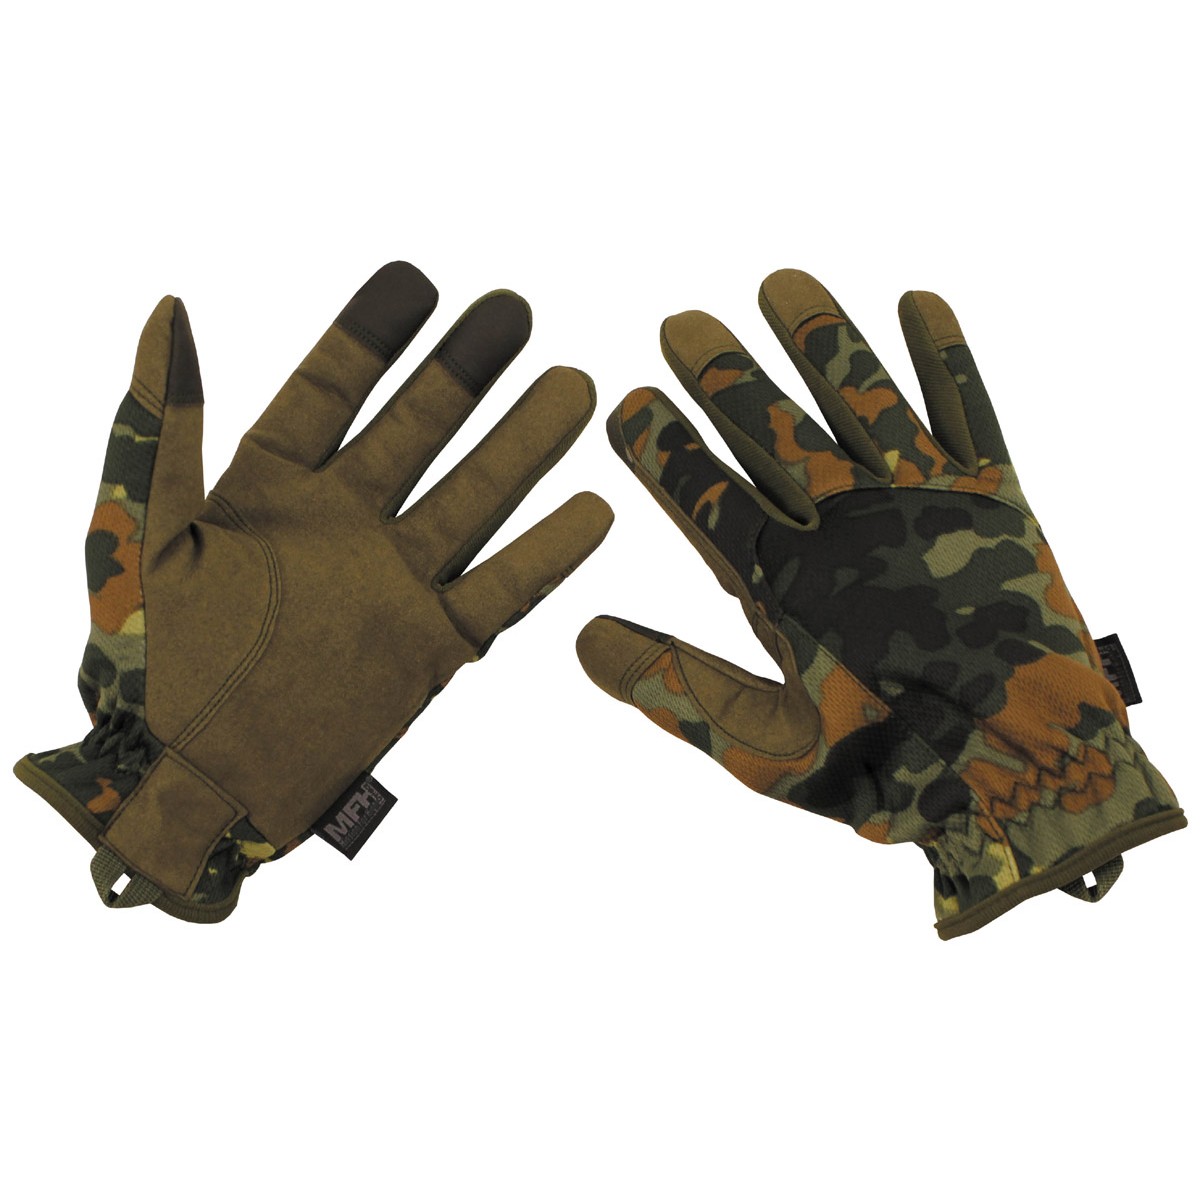 Professional Lightweight Tactical Military Gloves BW German Army Flectarn